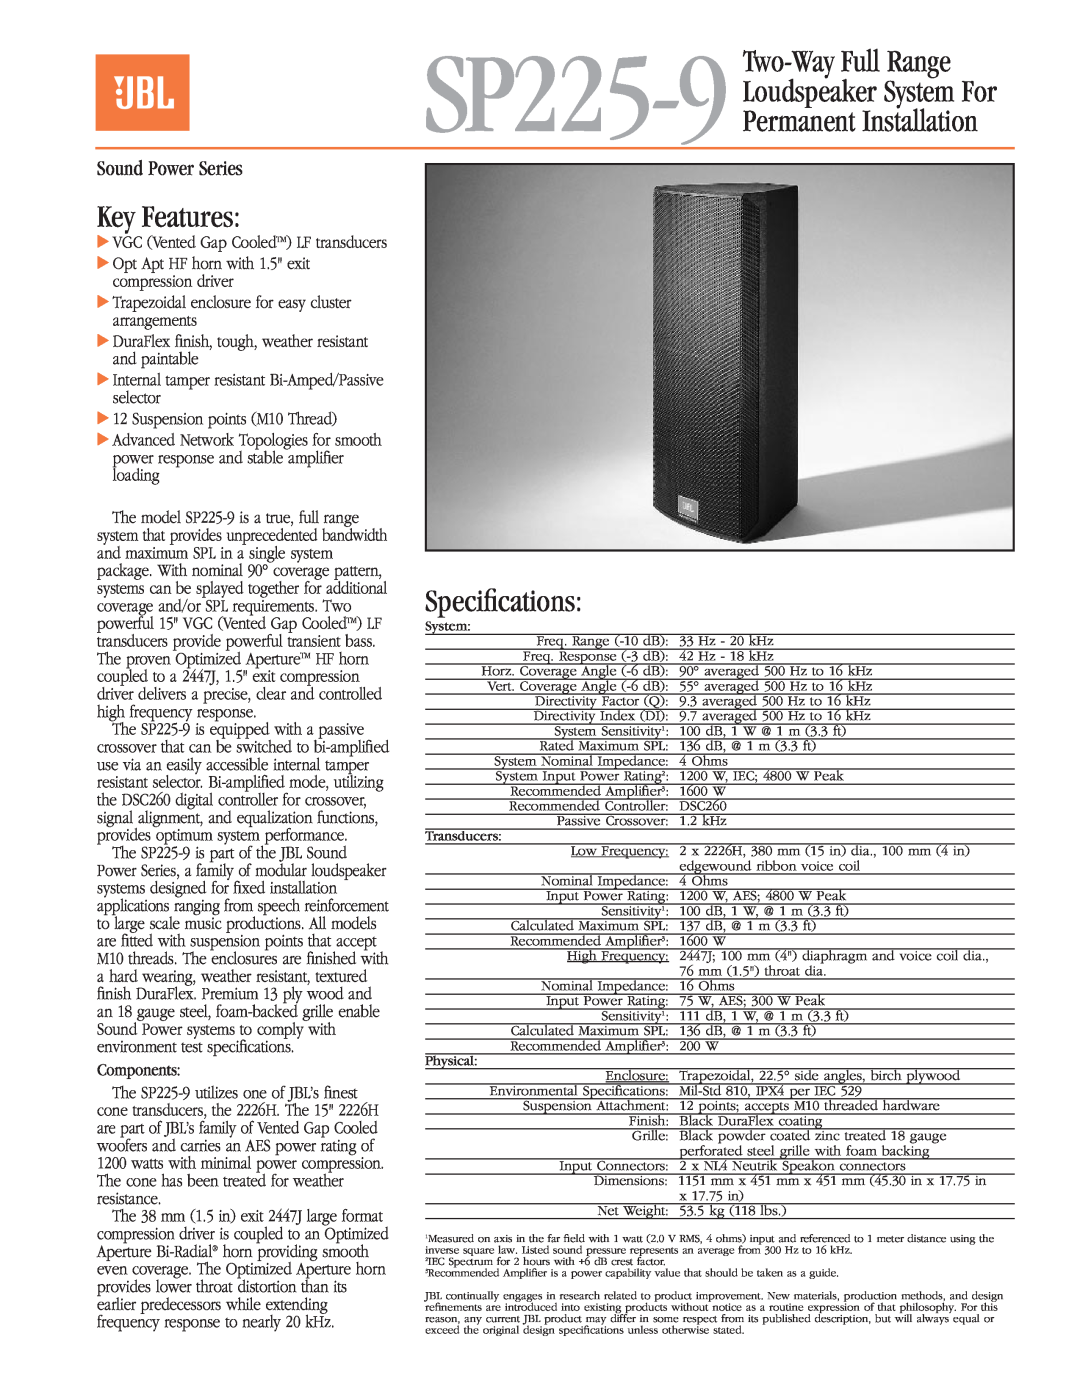 JBL SP225-9 specifications Loudspeaker System For Permanent Installation, Key Features, Speciﬁcations, Sound Power Series 